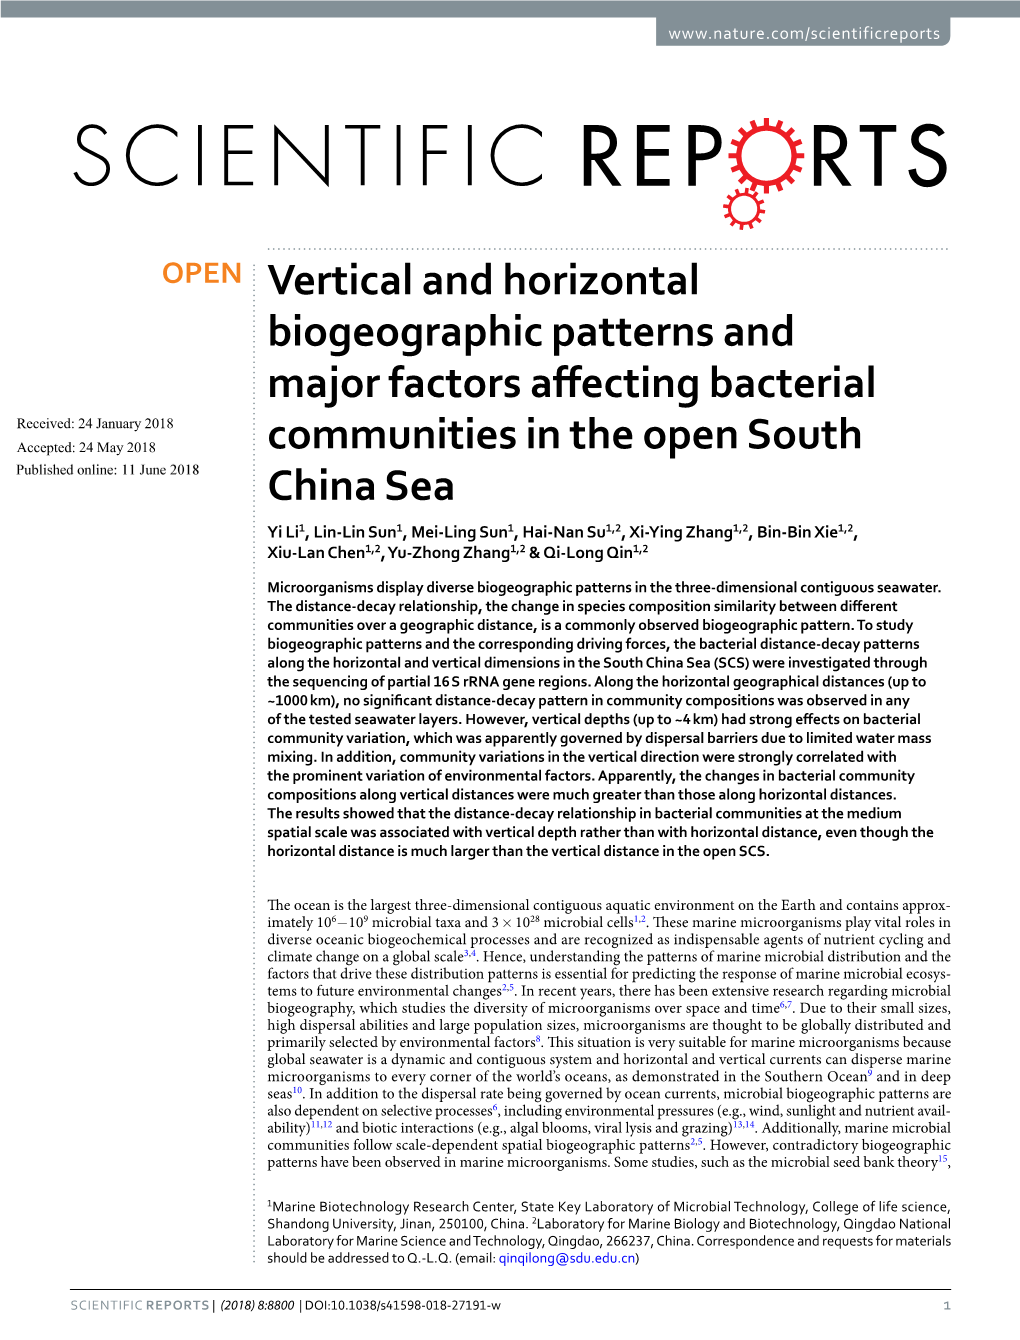 Vertical and Horizontal Biogeographic Patterns and Major Factors Affecting